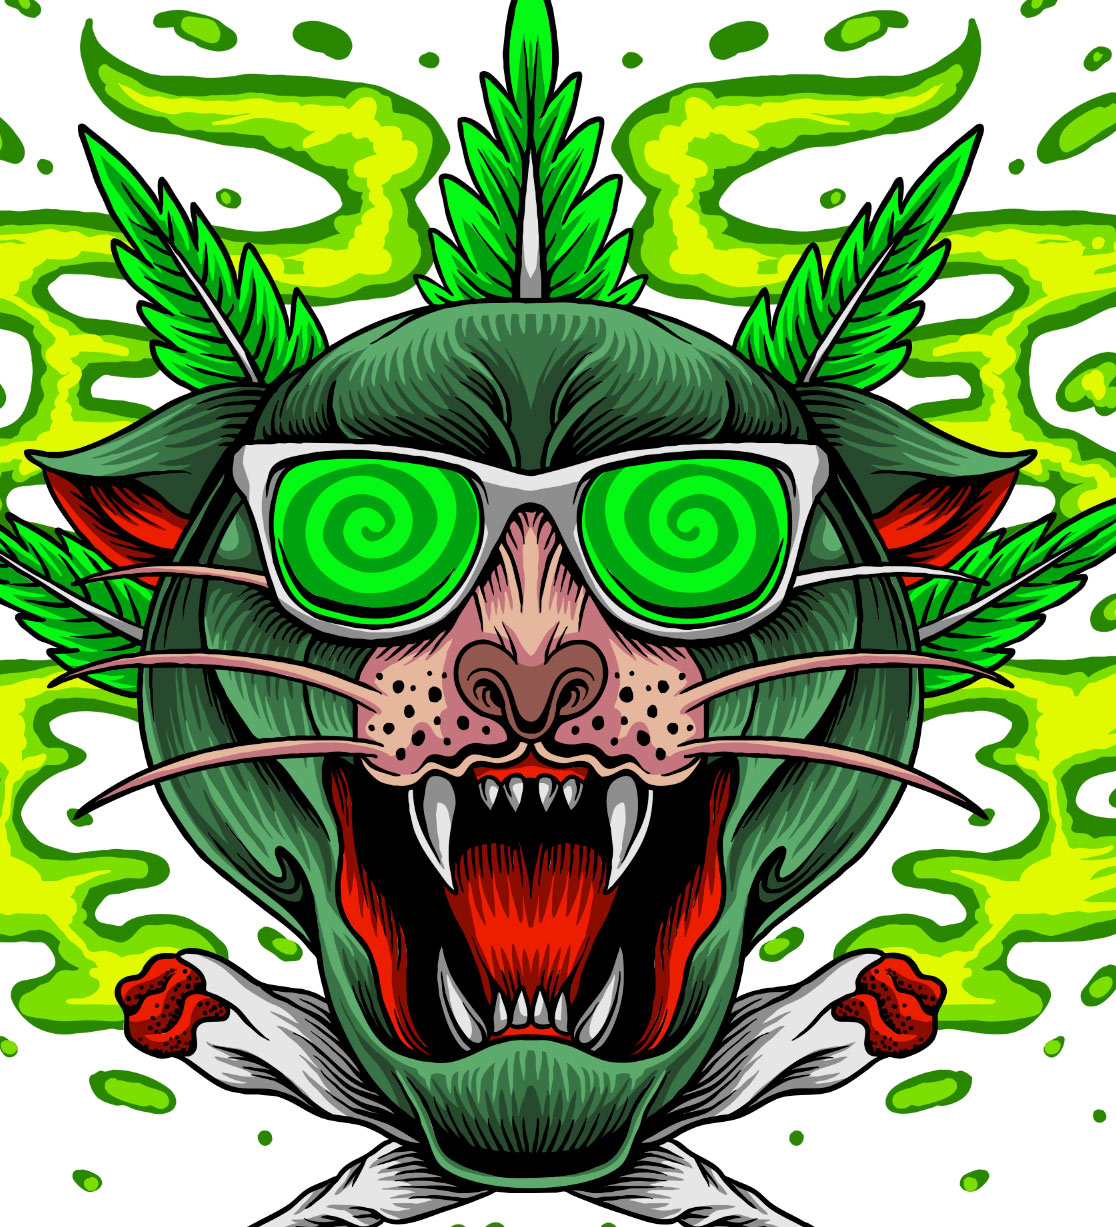 StonerDays Greenz Panther White Tee design close-up with vibrant green cannabis motif